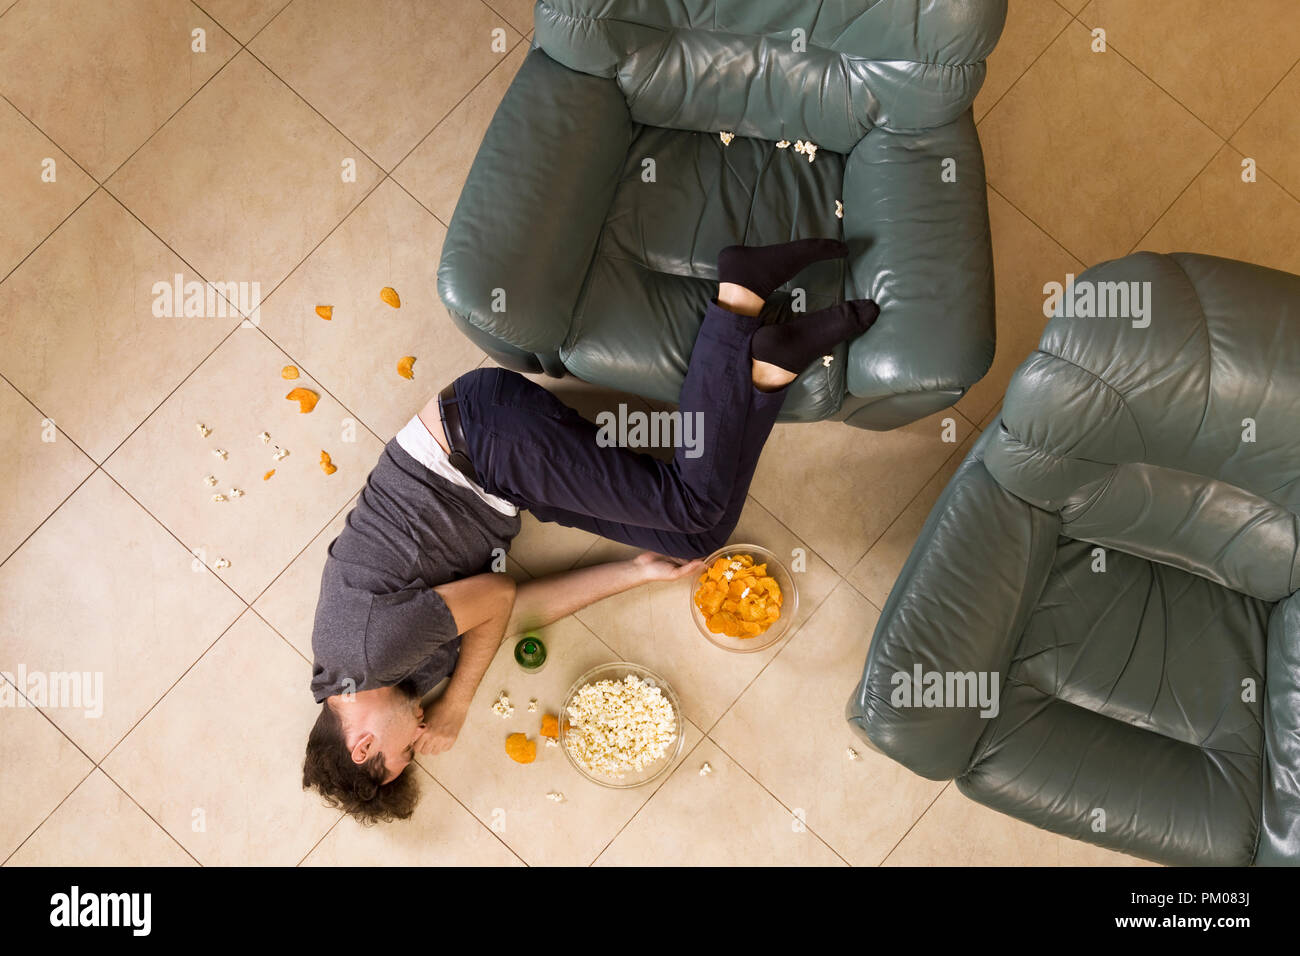 Top view of guy sleeping in messy room after having a party at home Stock Photo